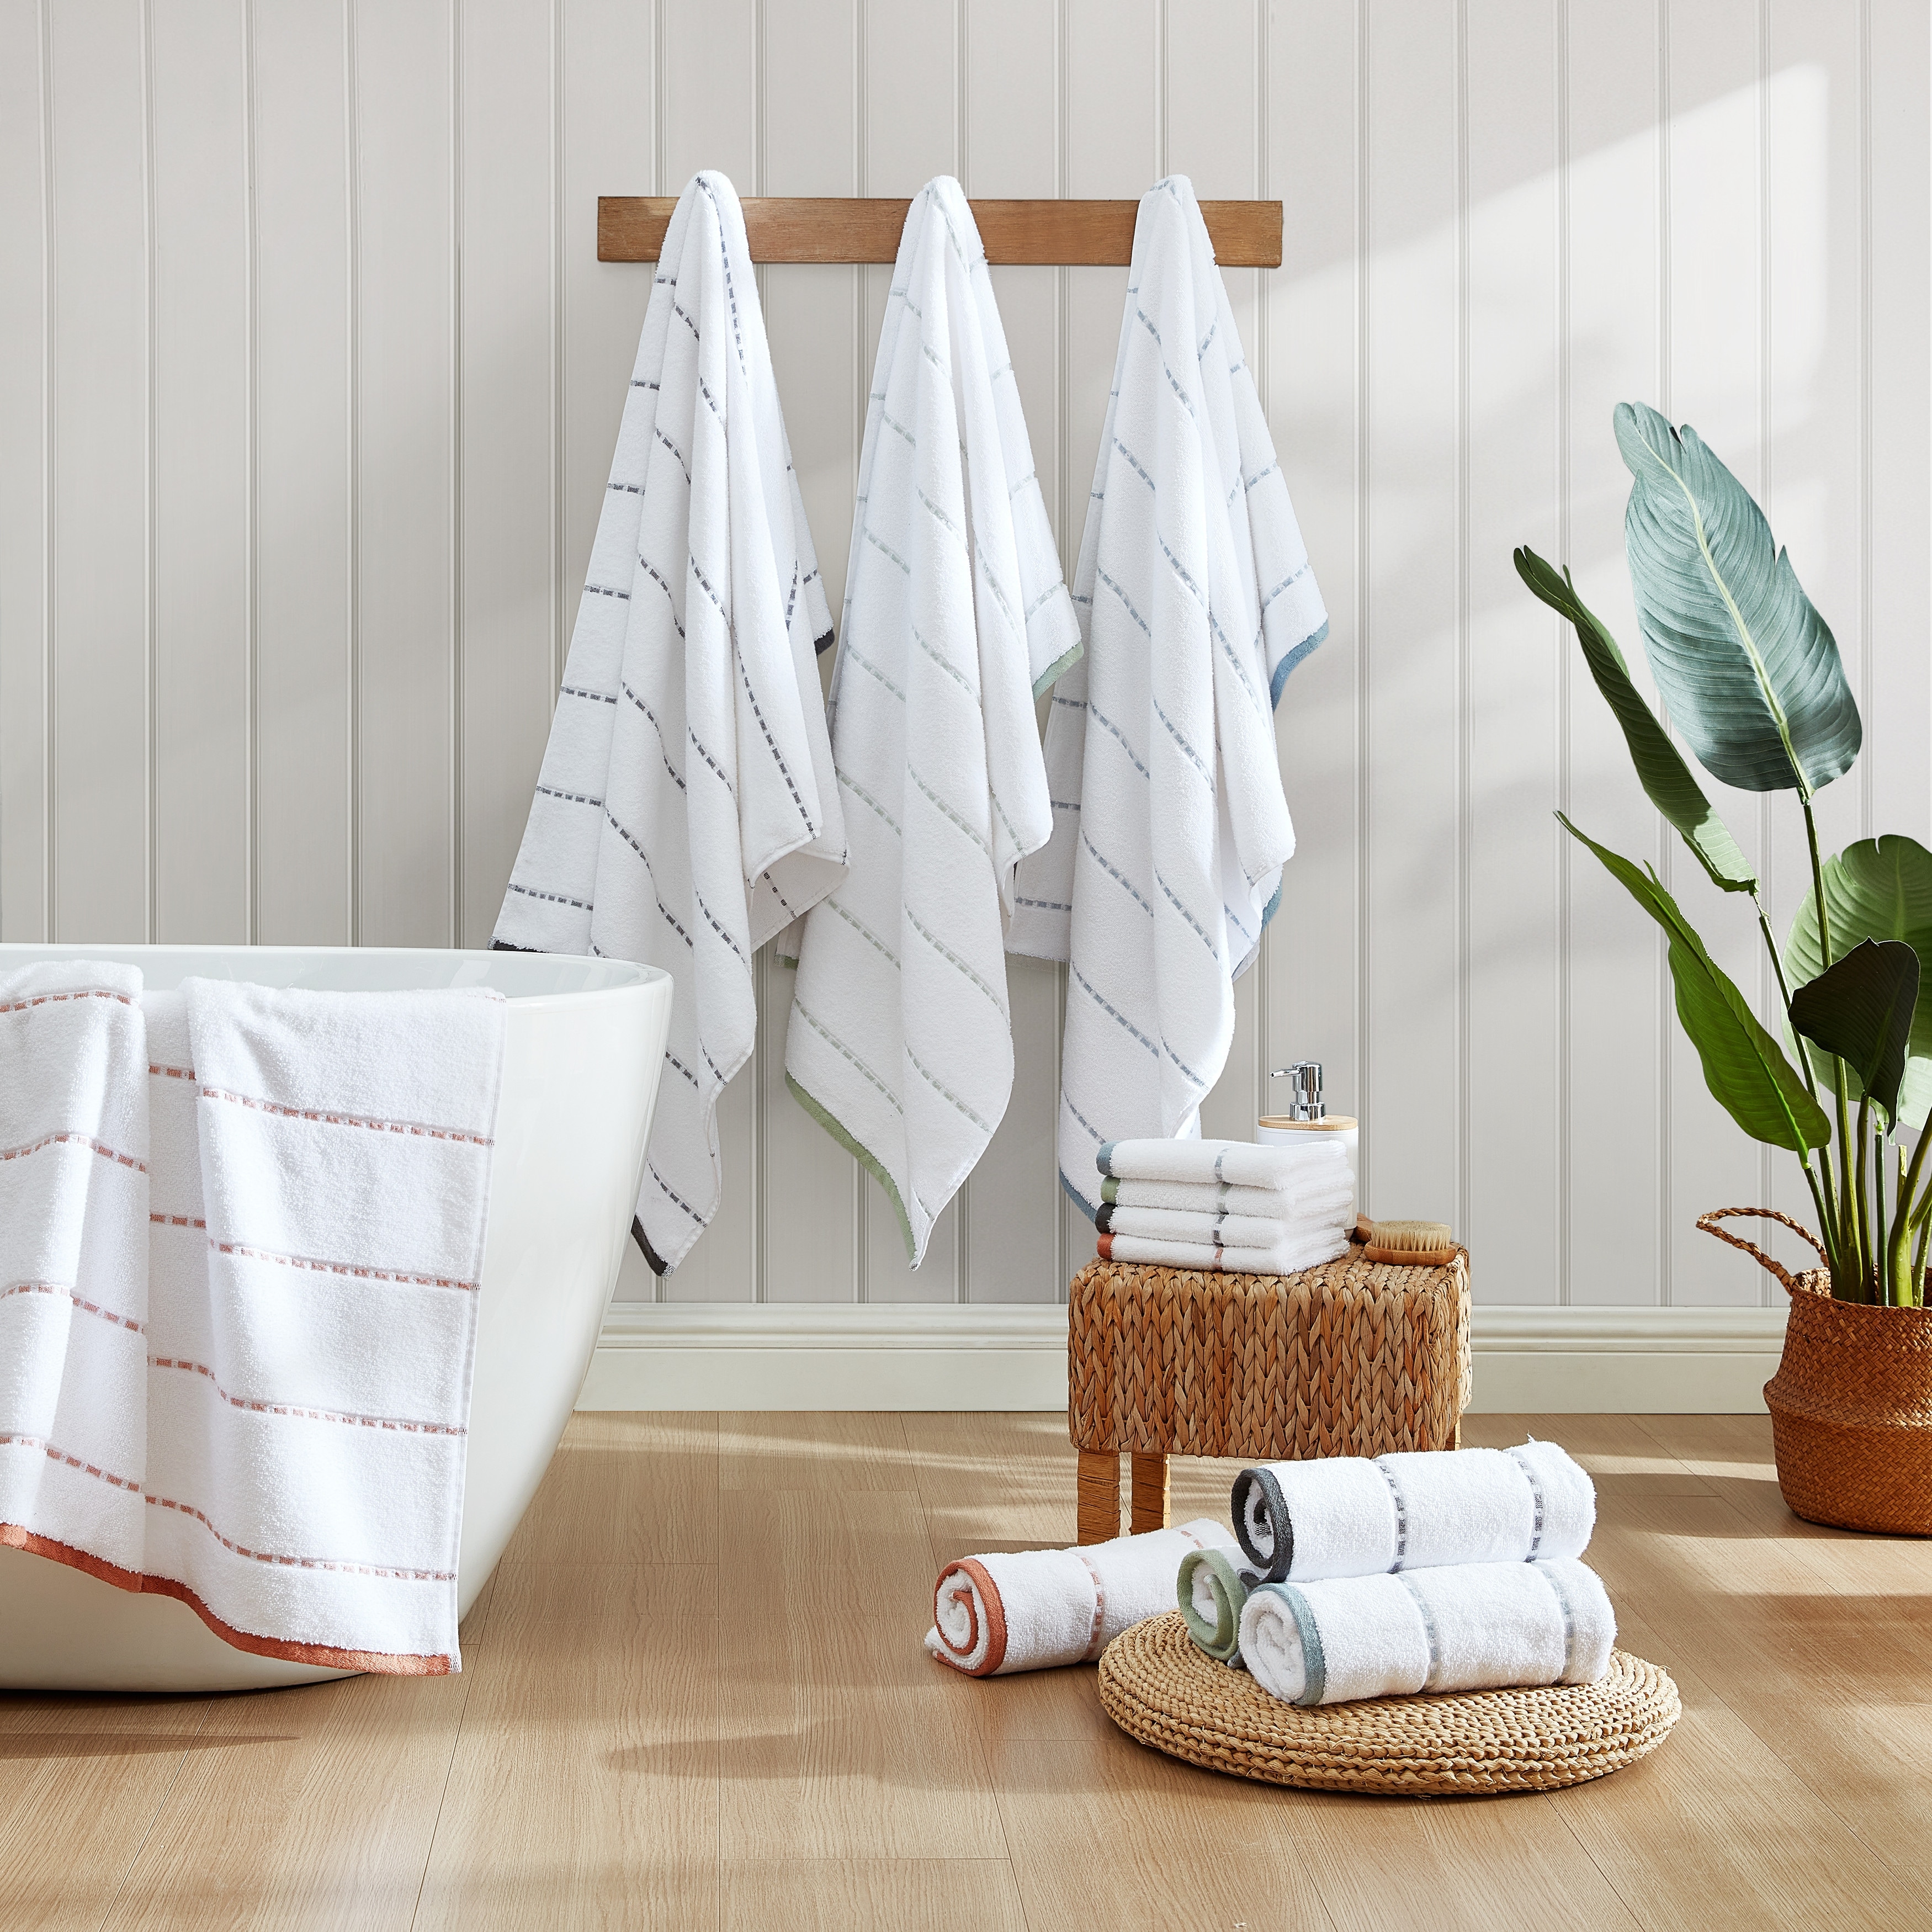 https://ak1.ostkcdn.com/images/products/is/images/direct/89a0c6e56cba7196702e81742ee853f49ecc307c/Tommy-Bahama-Ridley-Solid-Cotton-3-Piece-Towel-Set.jpg